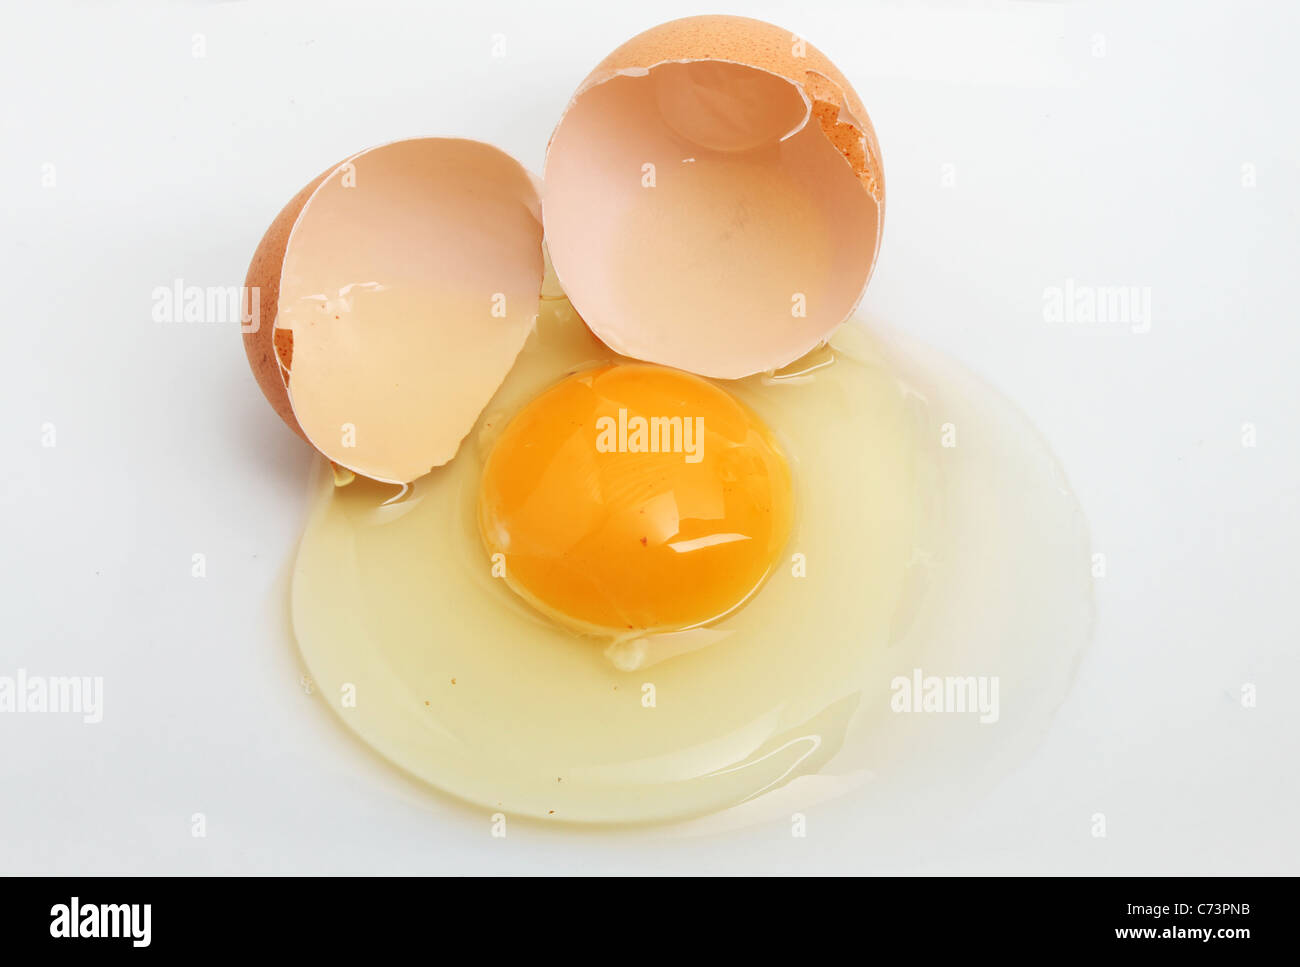 Cracked egg and shell on a white background Stock Photo